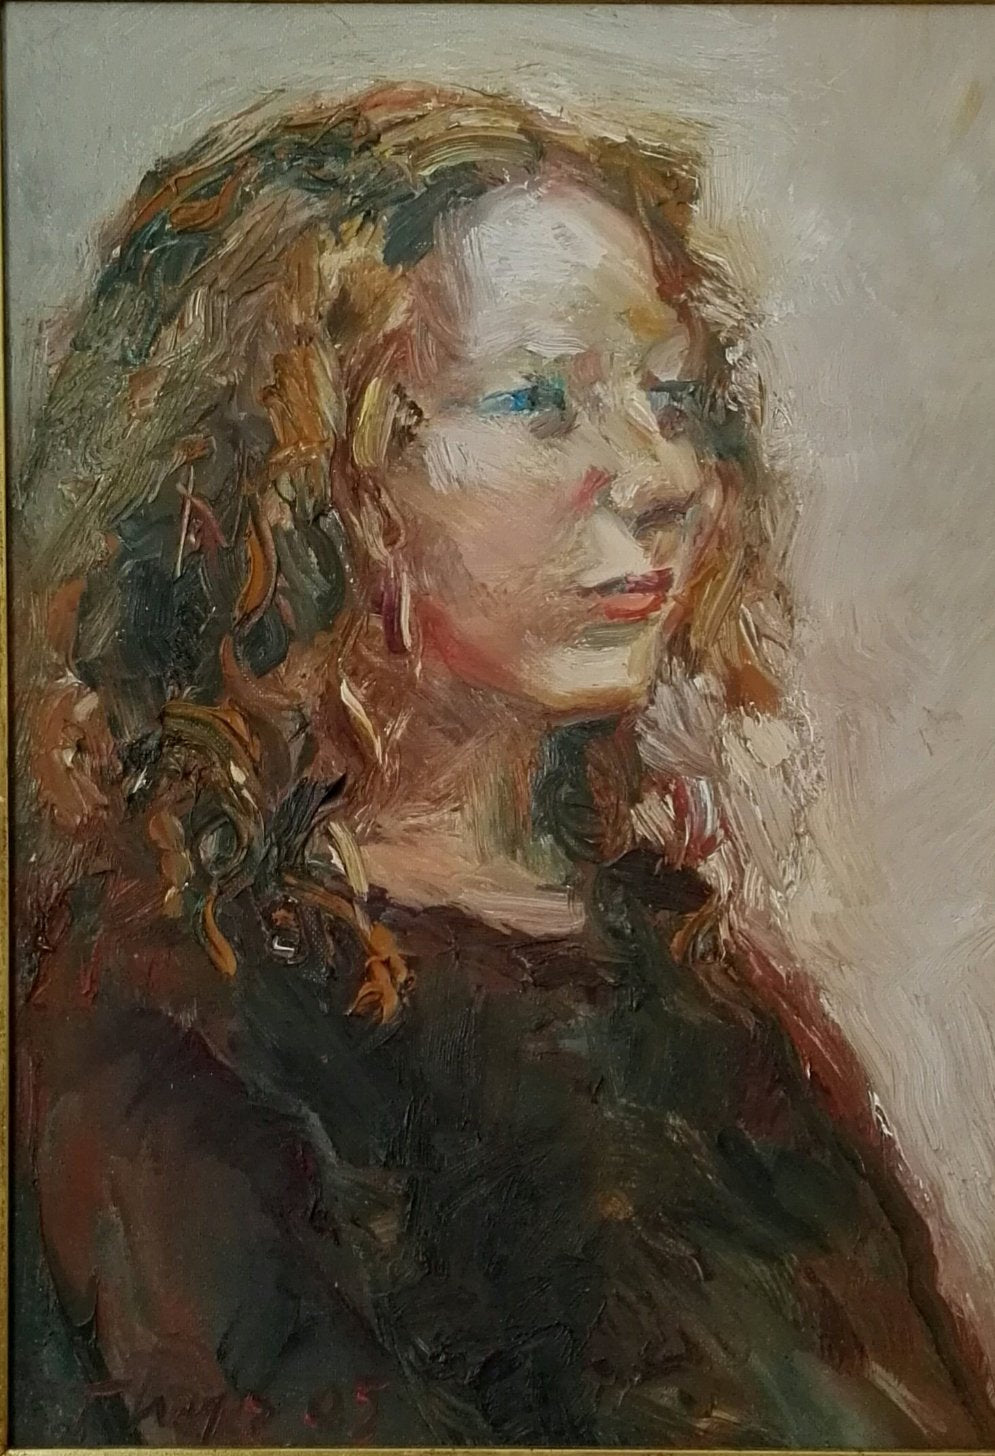 ‘Girl with curly hair’  2005 oil on linen 45x35cm